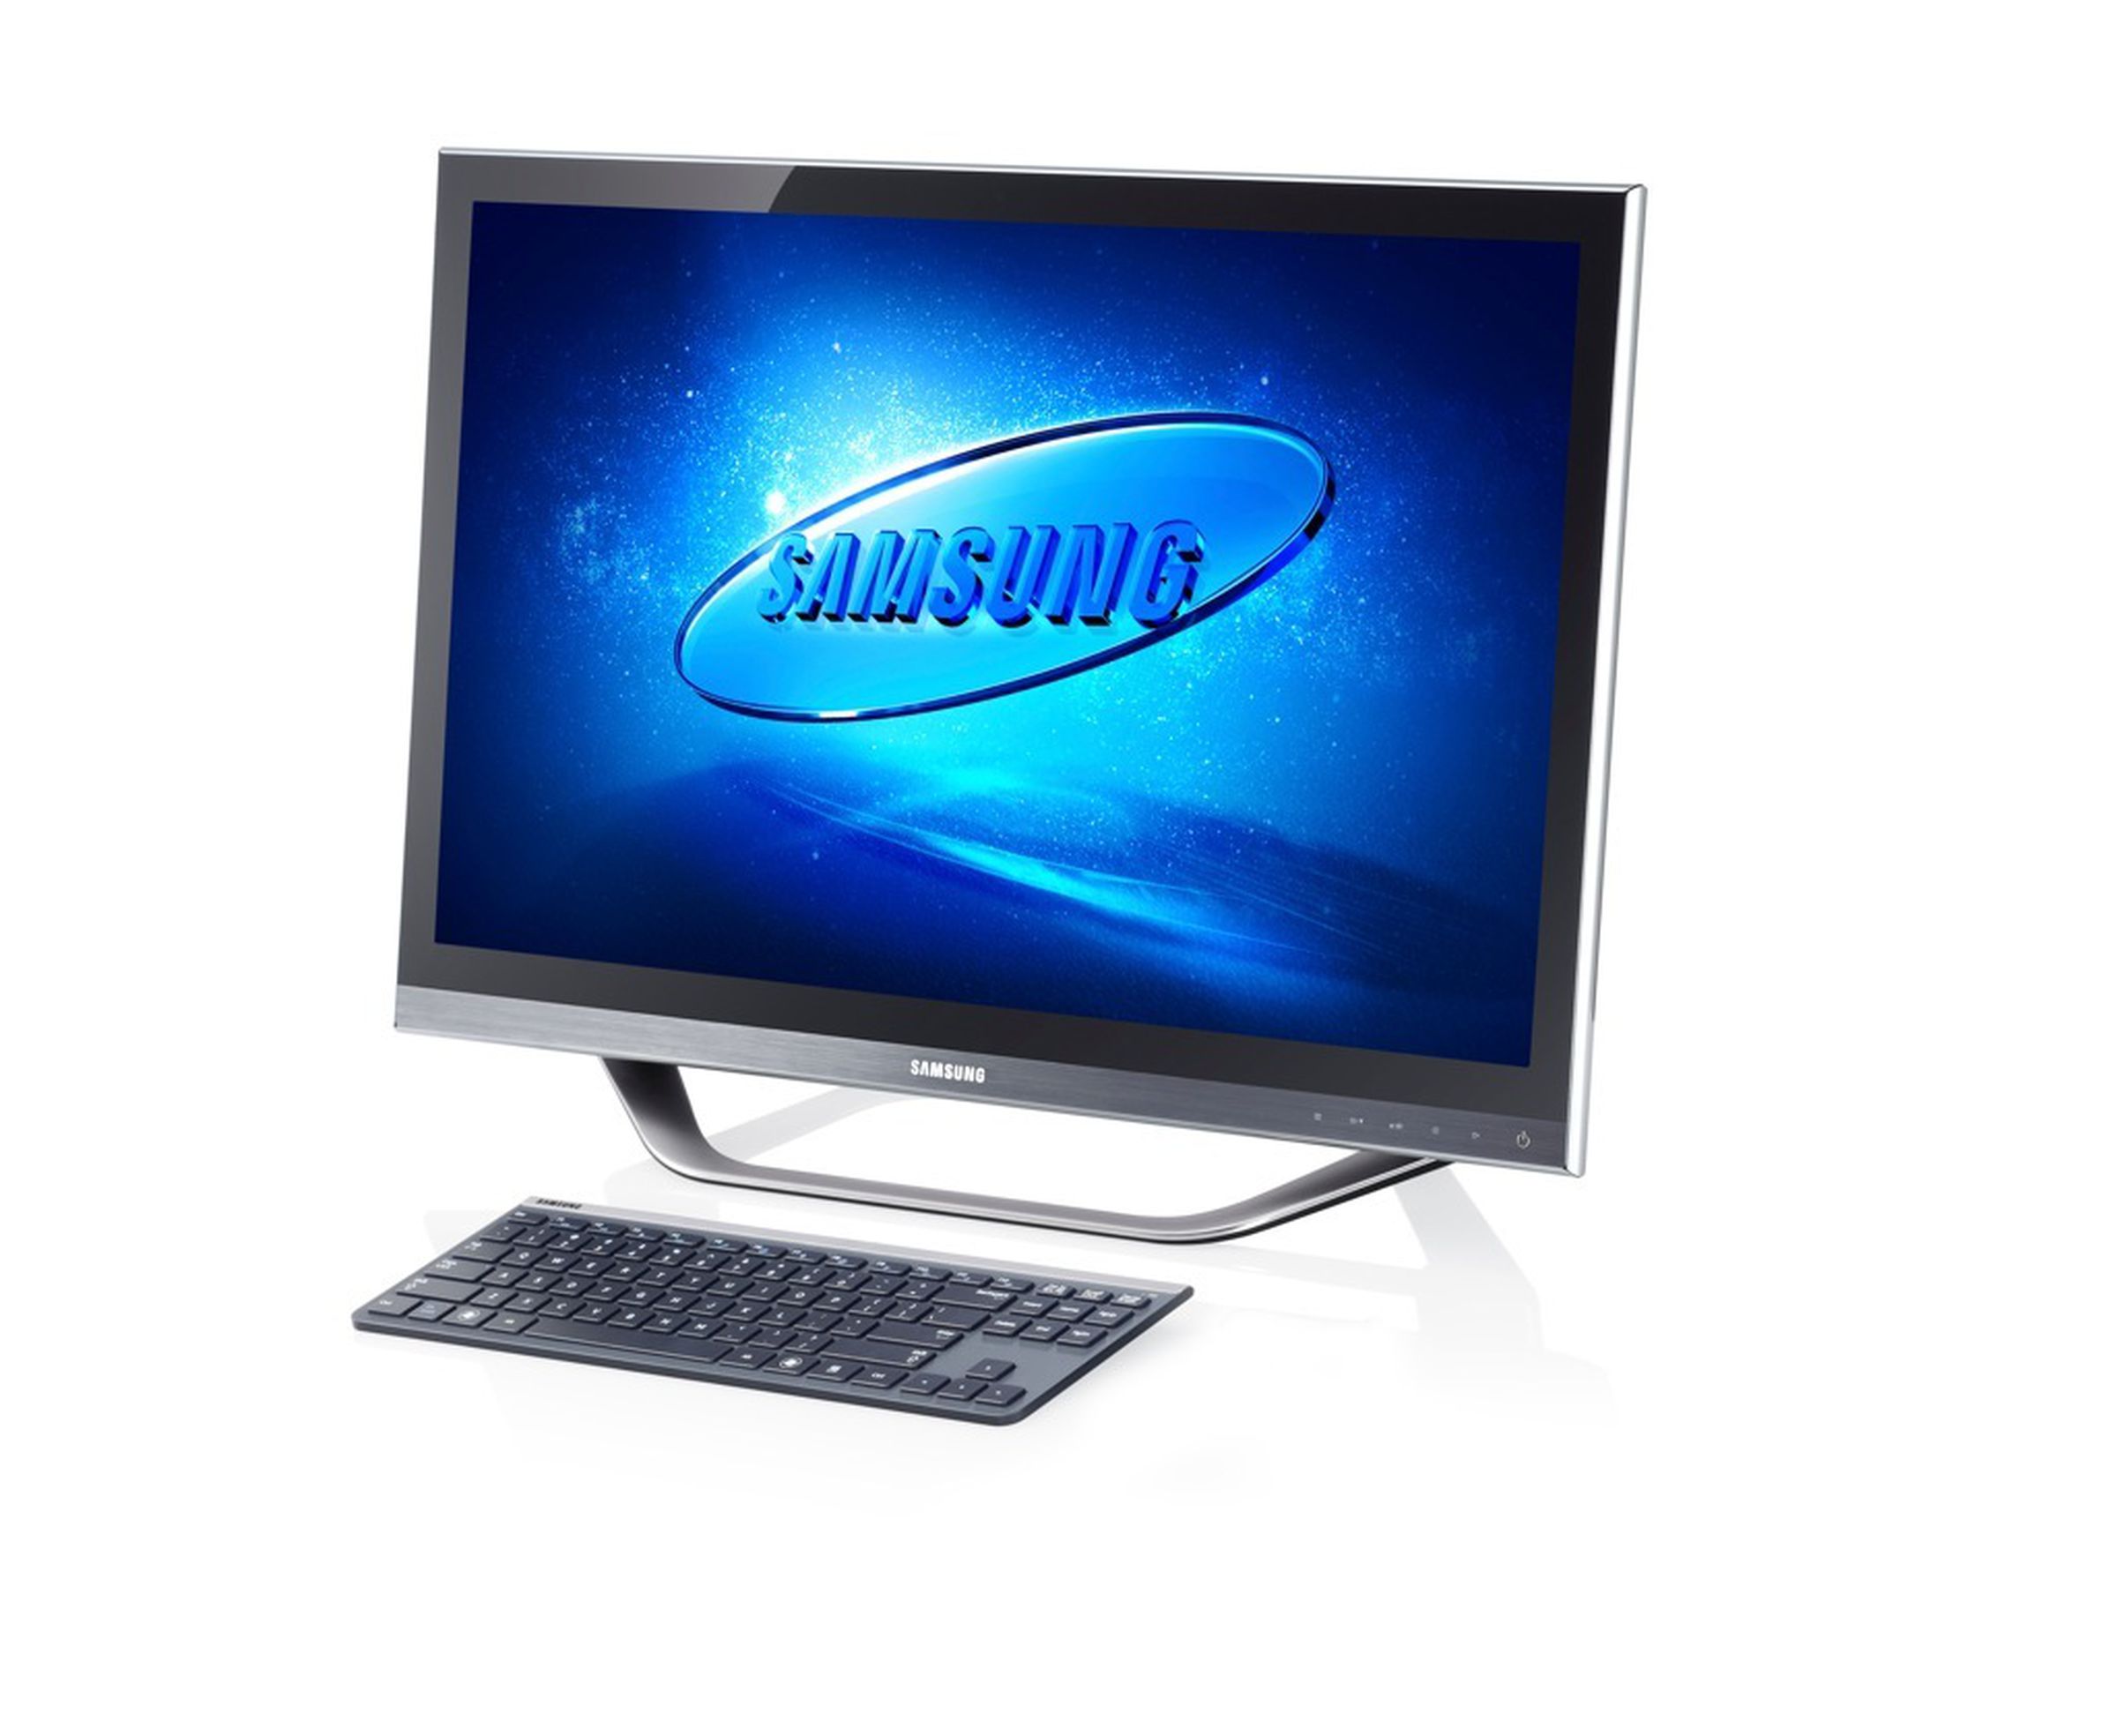 Samsung Series 5 and Series 7 All-in-One pictures